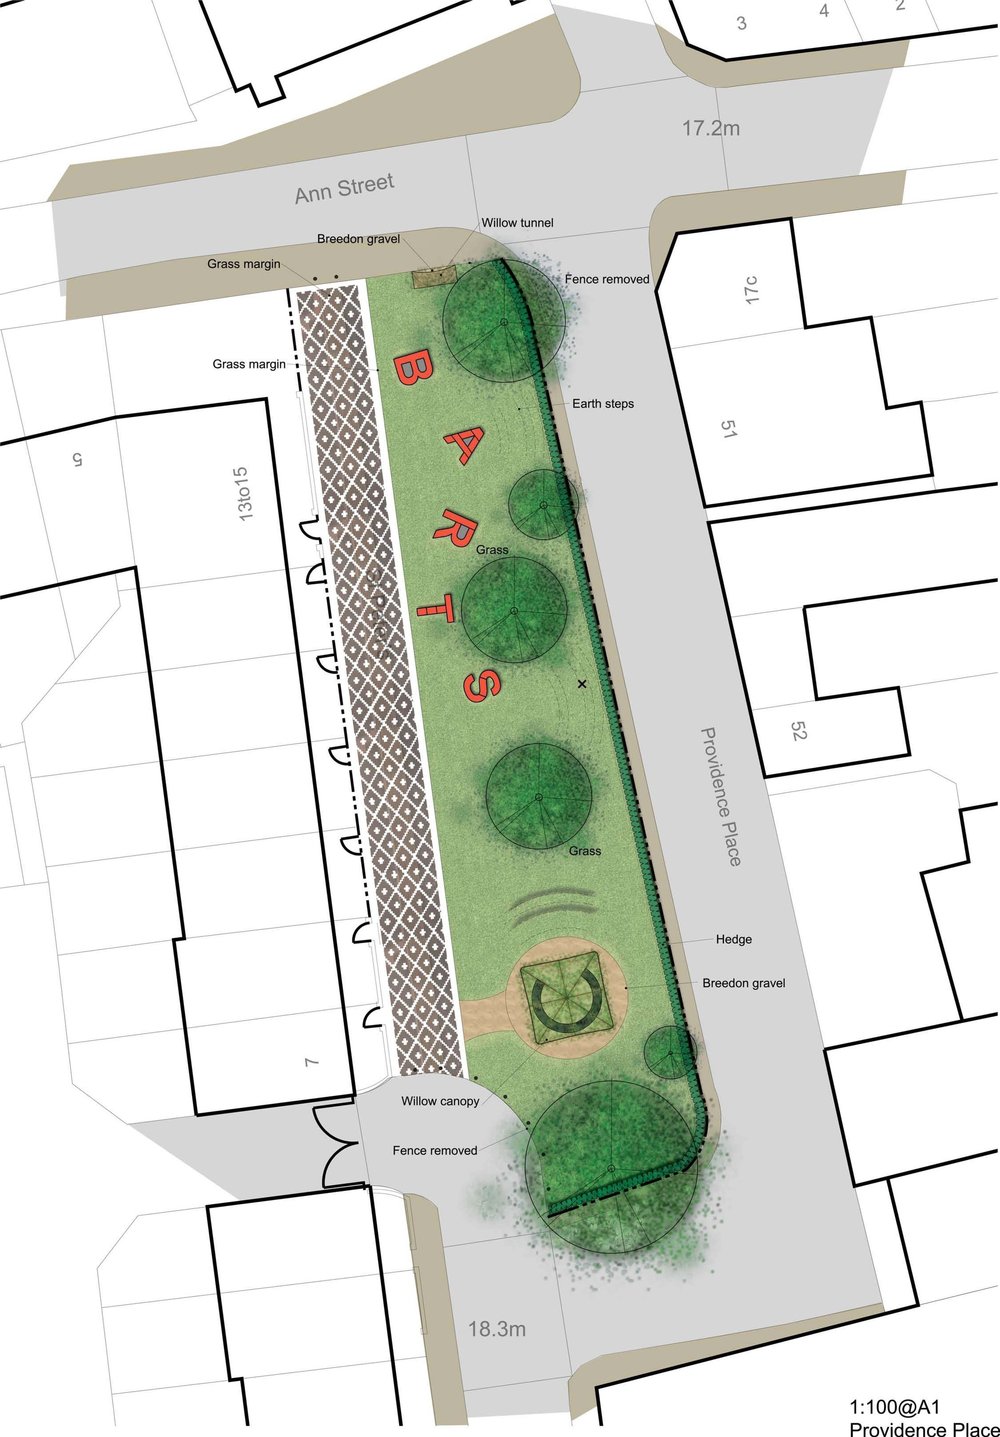 Plan view of proposed Barts Garden design